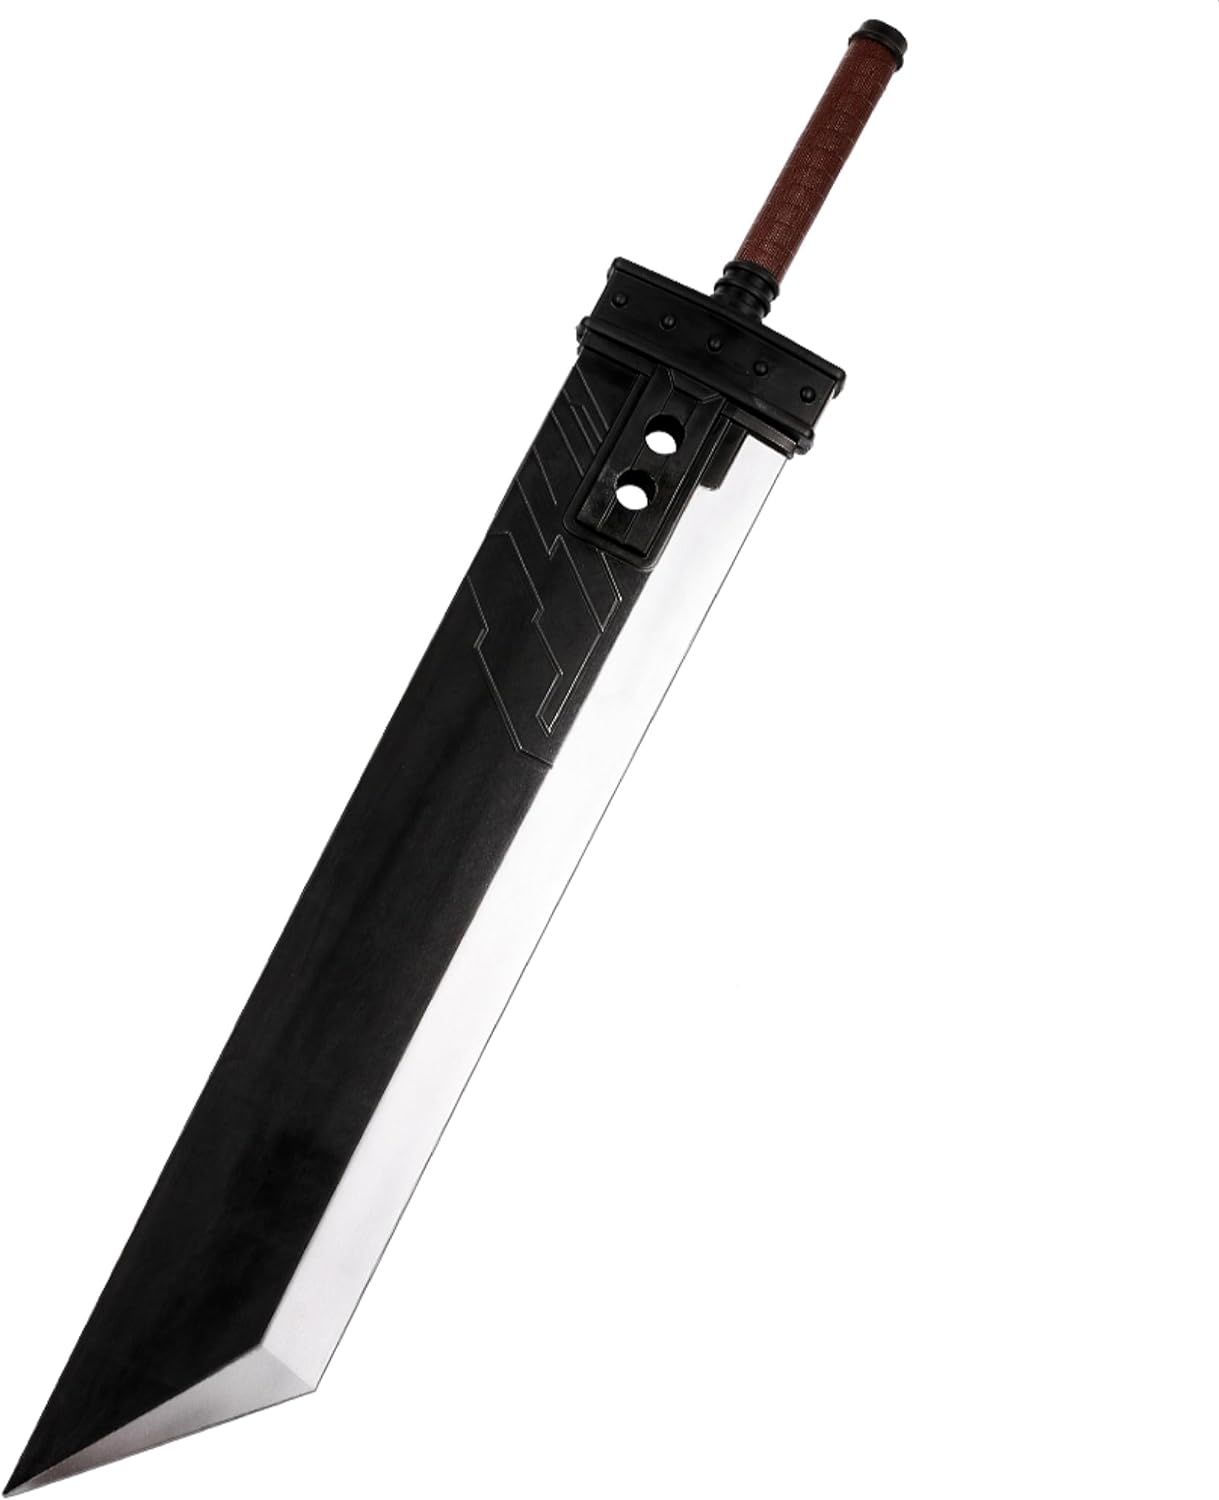 Cloud And Final Fantasy 7 VII Blade Buster Foam Sword (Red-Handle) Anime Cosplay Costume Prop Replica Weapon